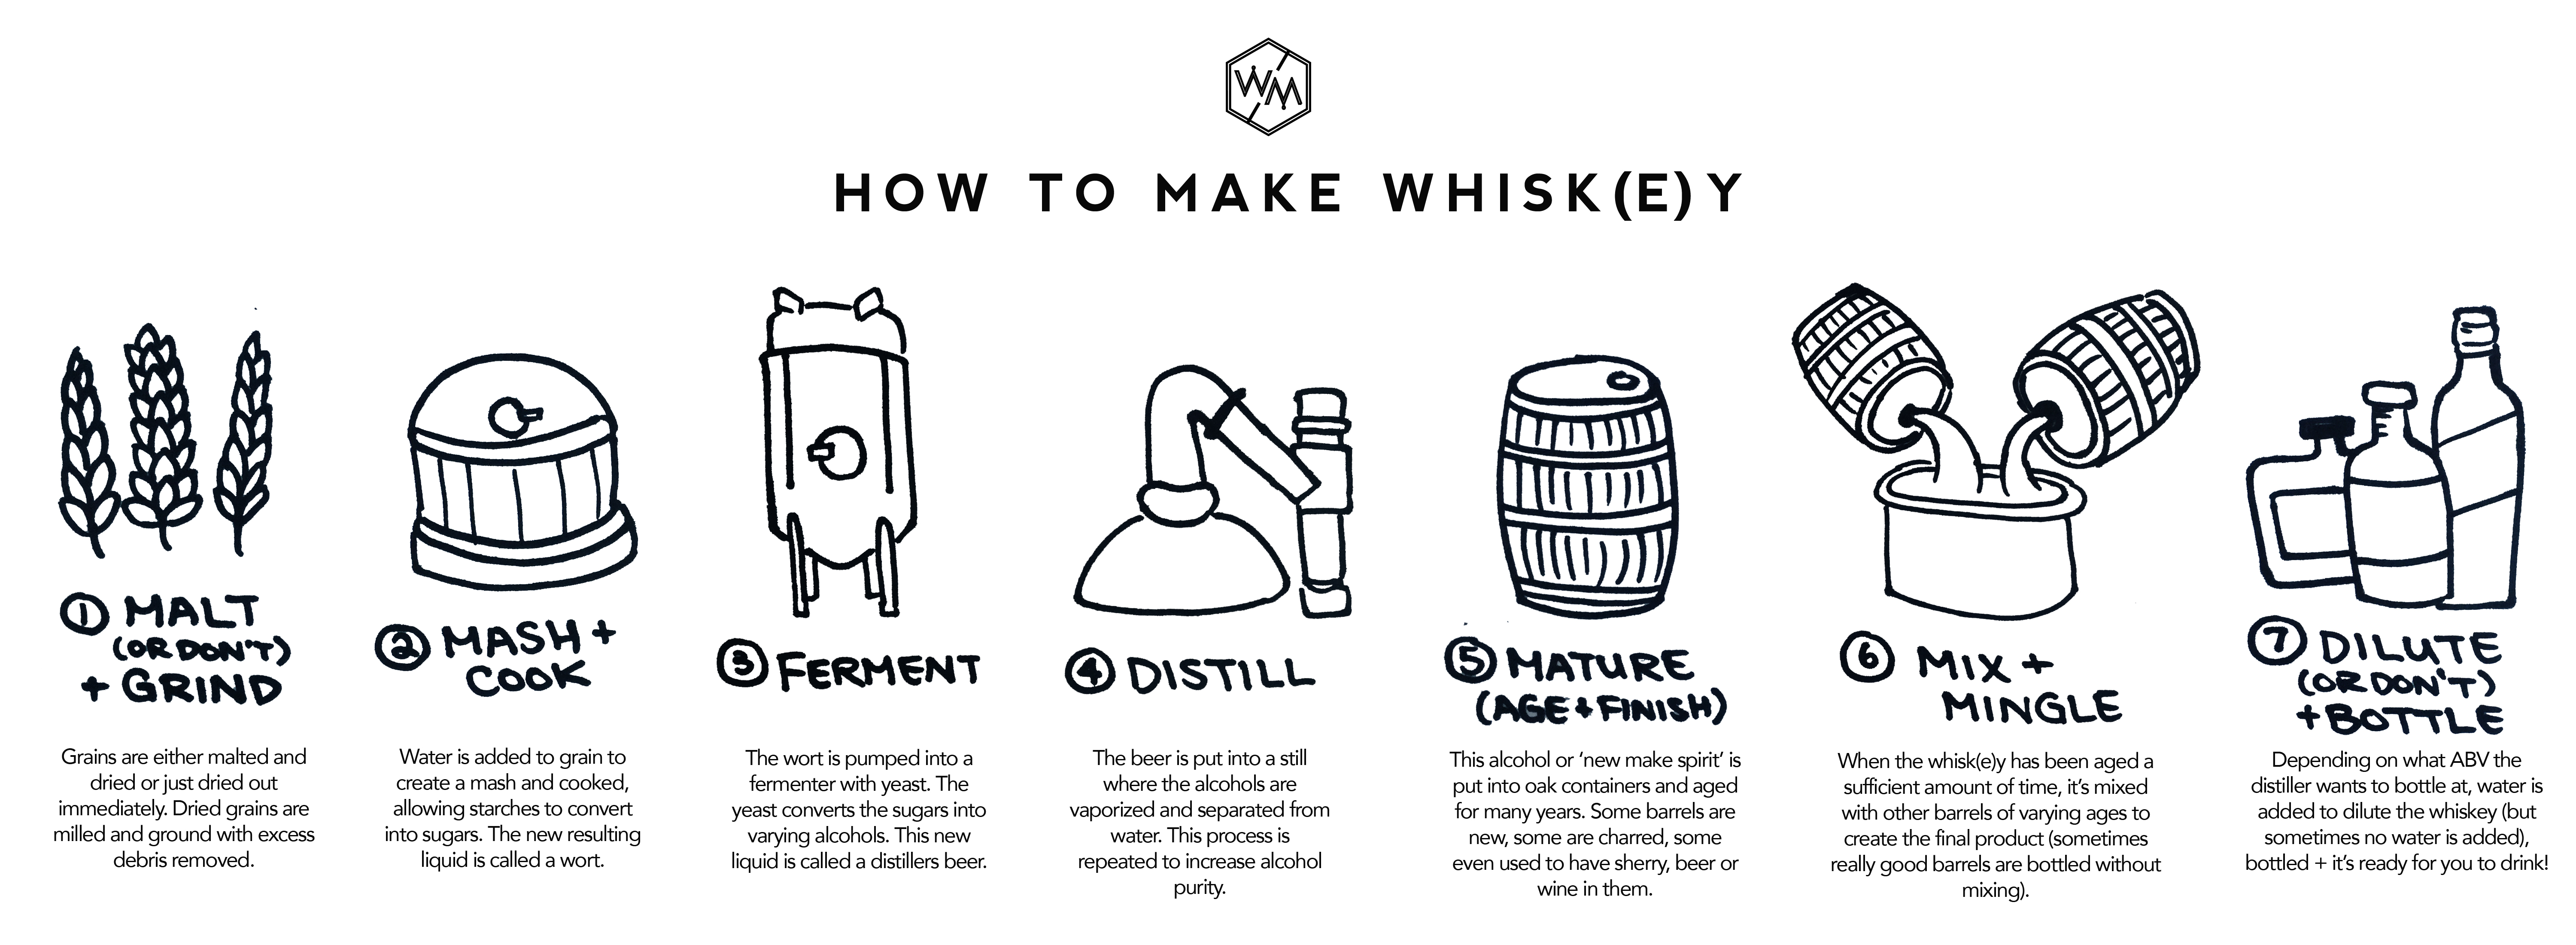 WHISKEY FOR BEGINNERS - A Complete Overview - Whiskey Muse